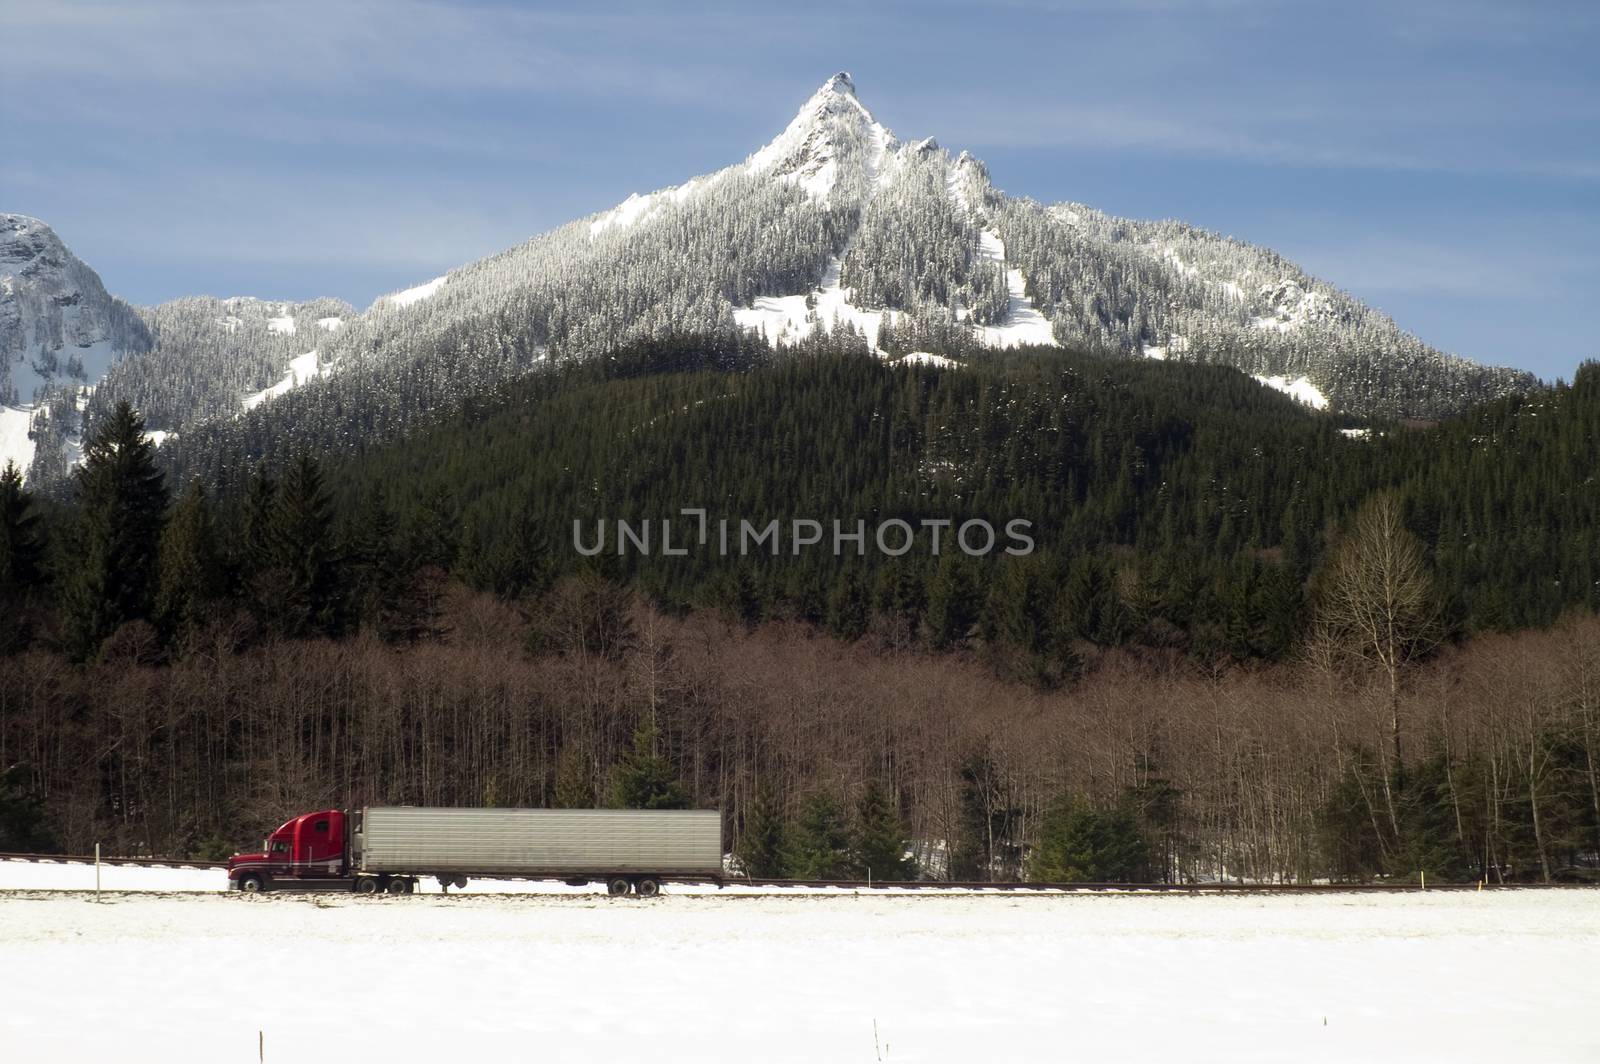 A fresh covering of snow blankets mountains over the pass on I-90